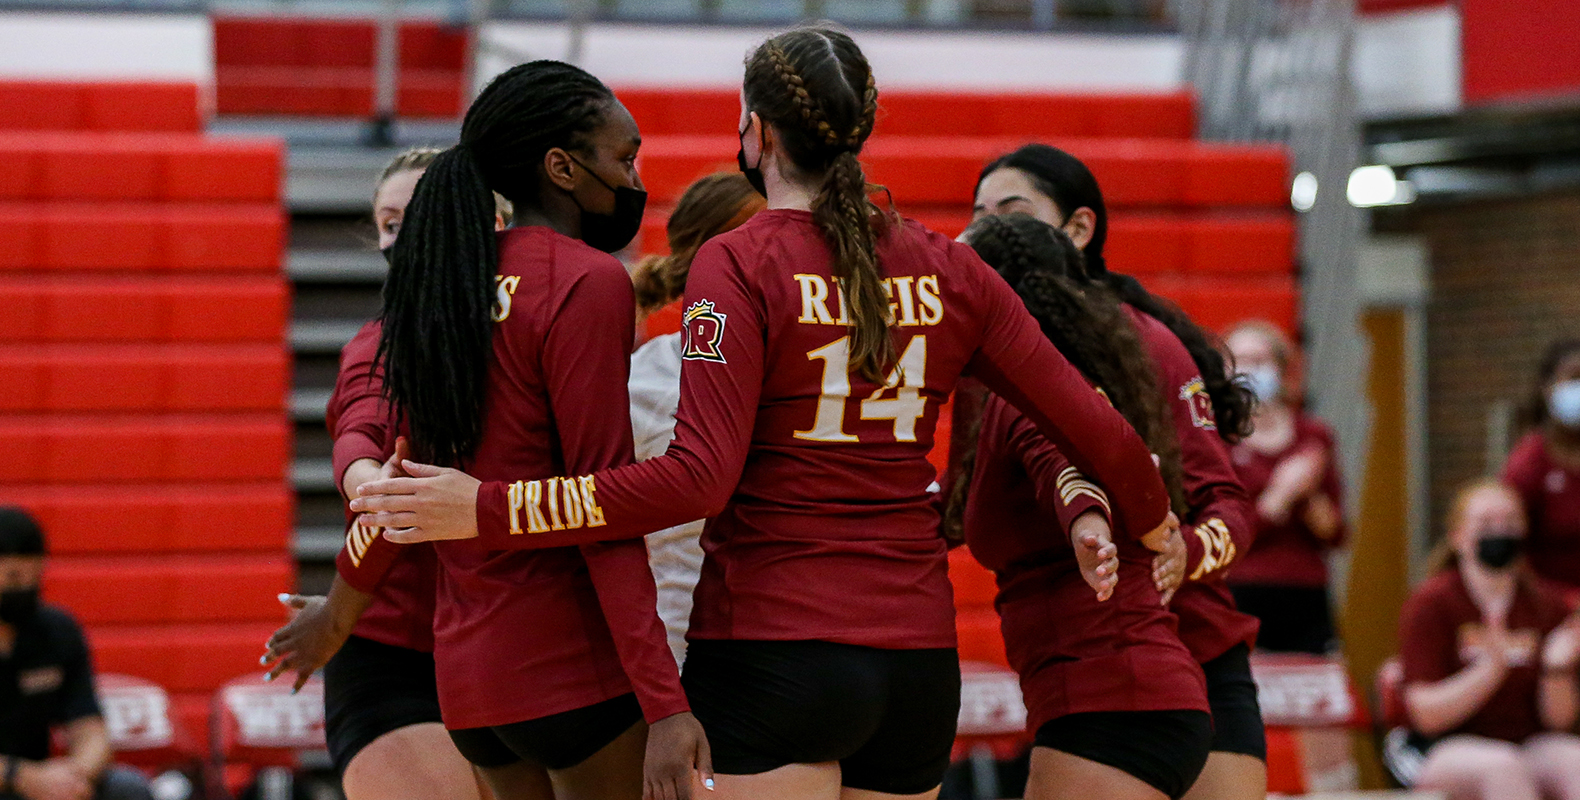 Regis Volleyball Comeback Comes Up Just Short